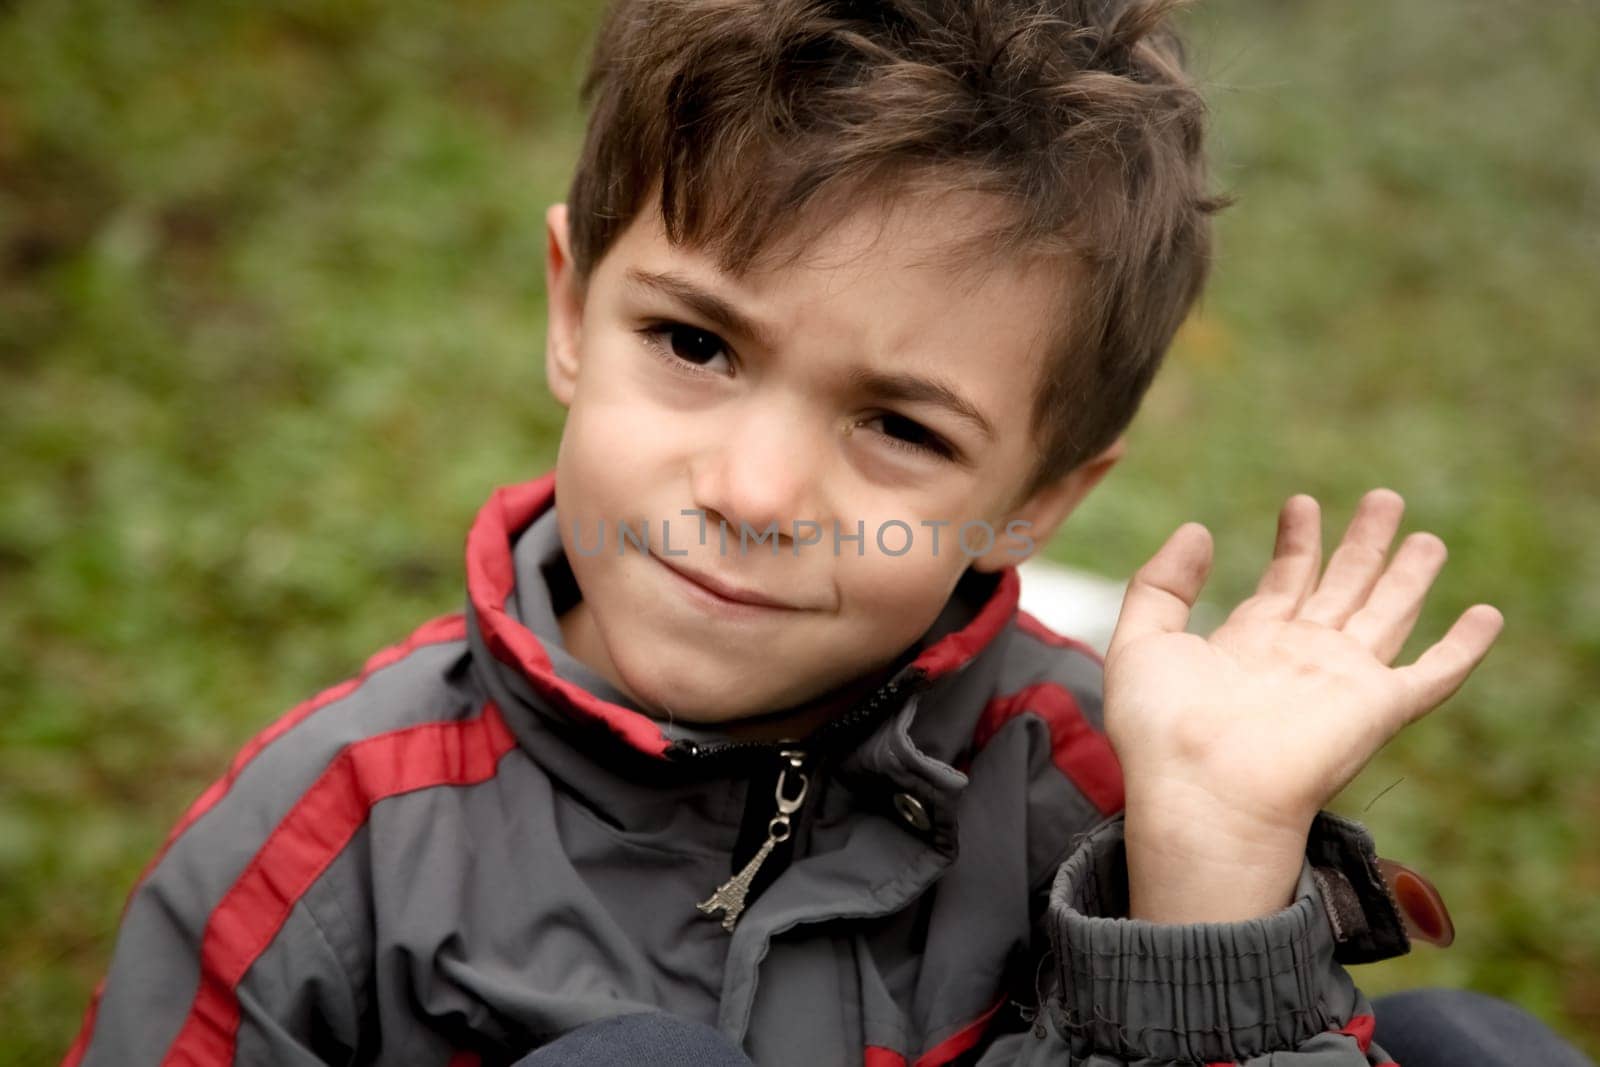 A crying arab child waving his hand. A boy wearing gray sport suit with red ribbons and eiffel tower on the clasp